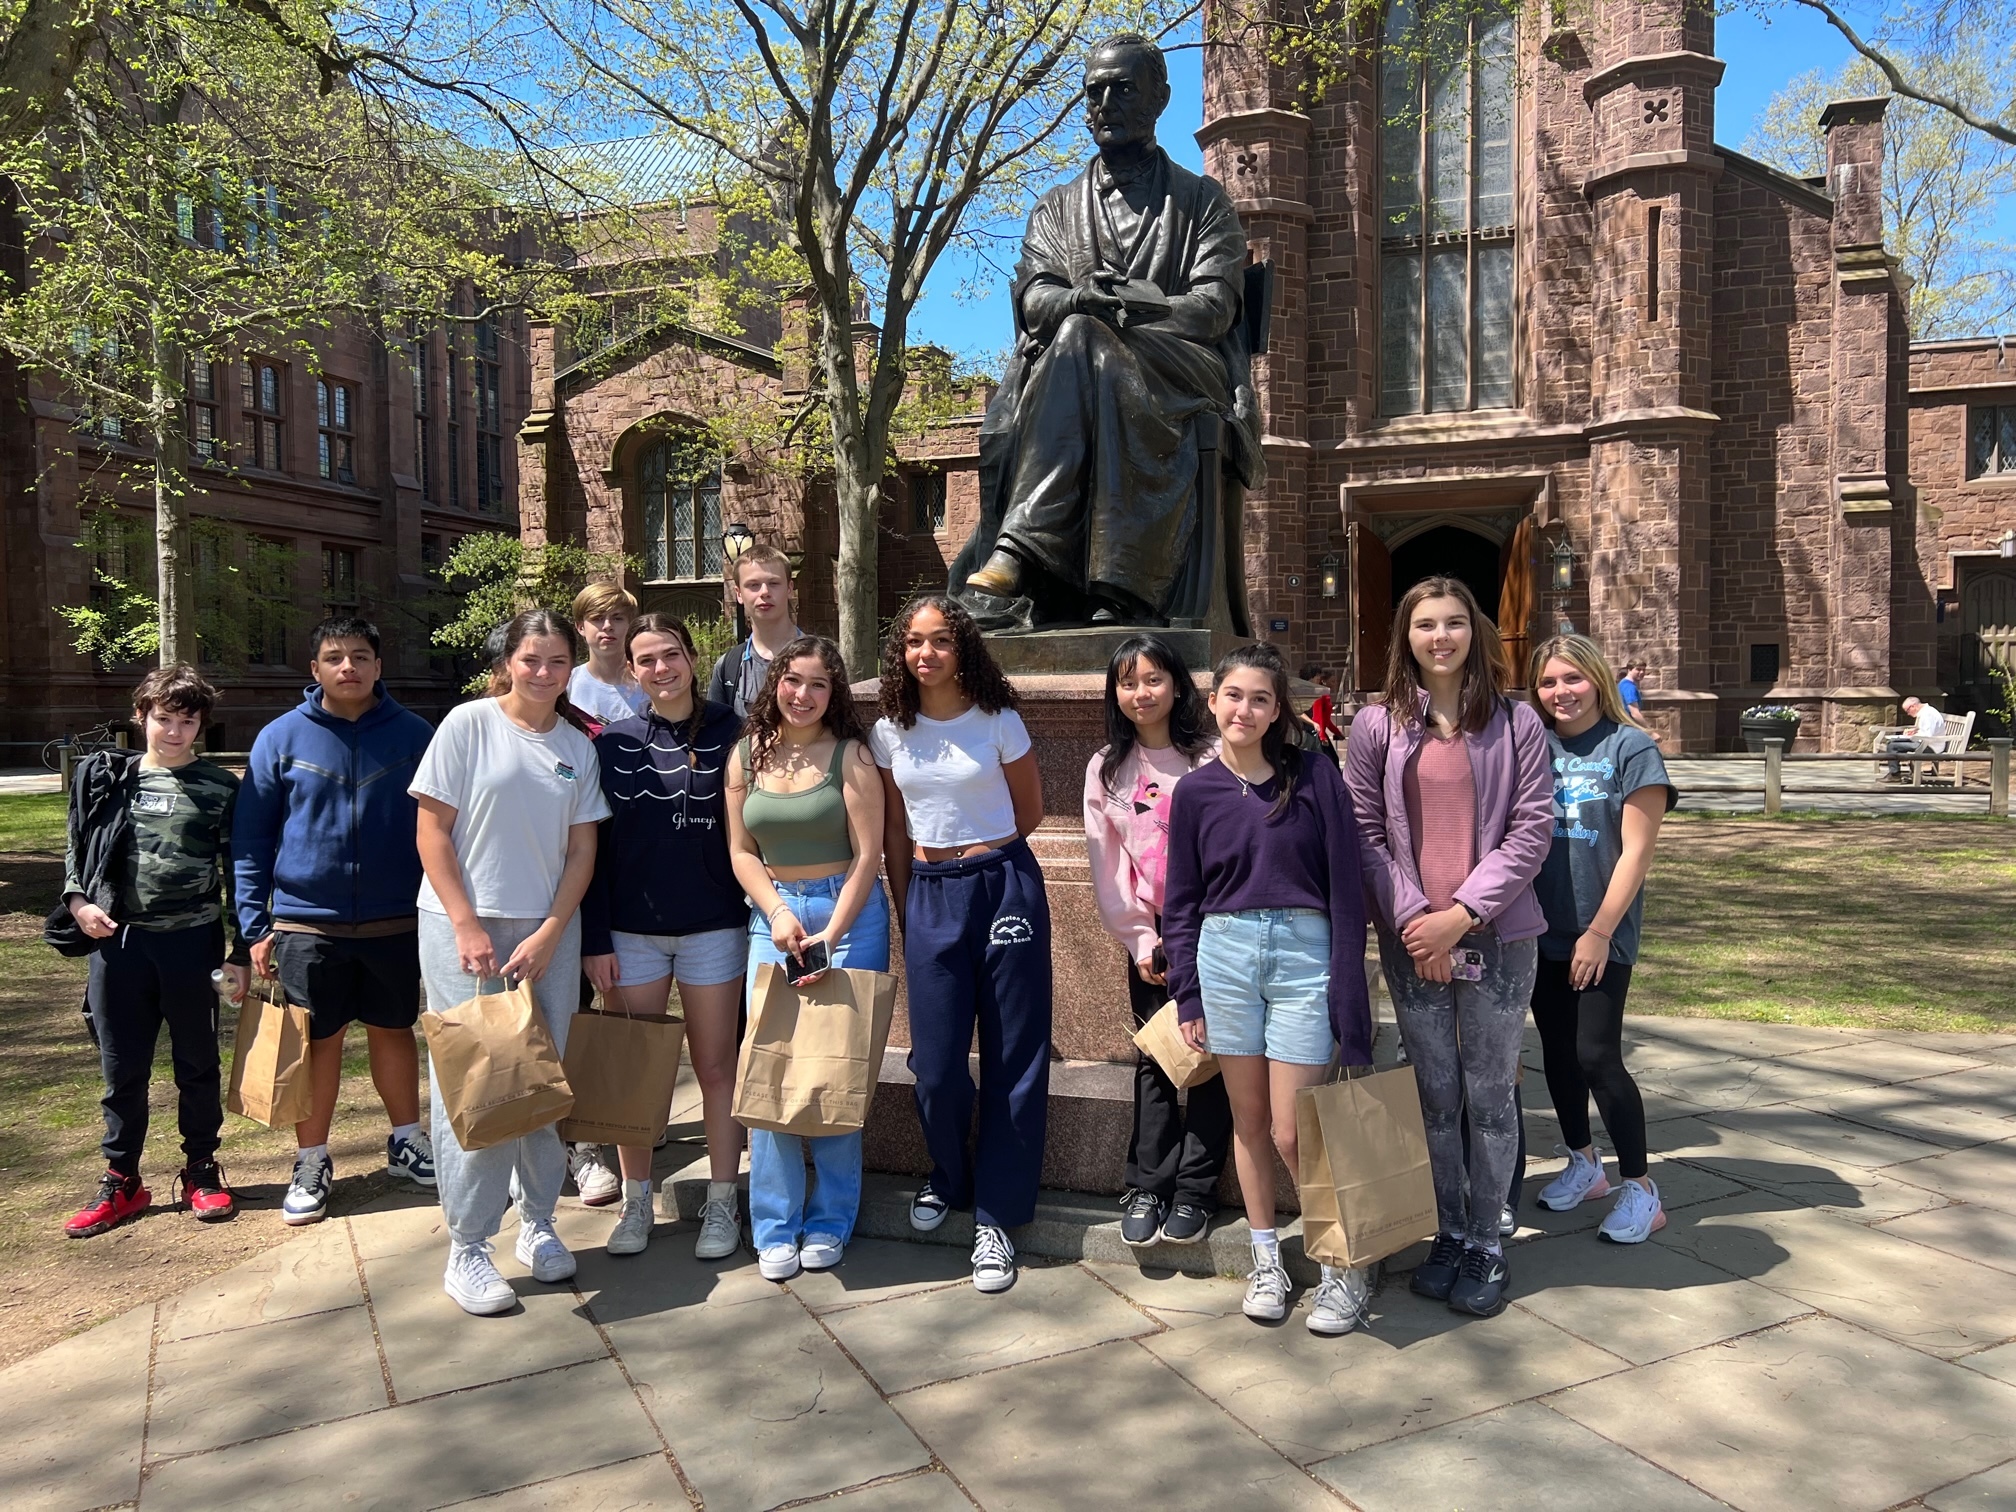 A group of Westhampton Beach High School freshmen recently toured the campus of Yale University. On the tour they learned about the college application process, what to look for in a college, how to compare different colleges and campuses, and what questions to ask during a
college visit. “It is important for freshmen to begin to develop a framework of their own
college preferences,” said Robert Finn, director of guidance and data management. The
students toured Sacred Heart University on the same day. COURTESY WESTHAMPTON BEACH SCHOOL DISTRICT